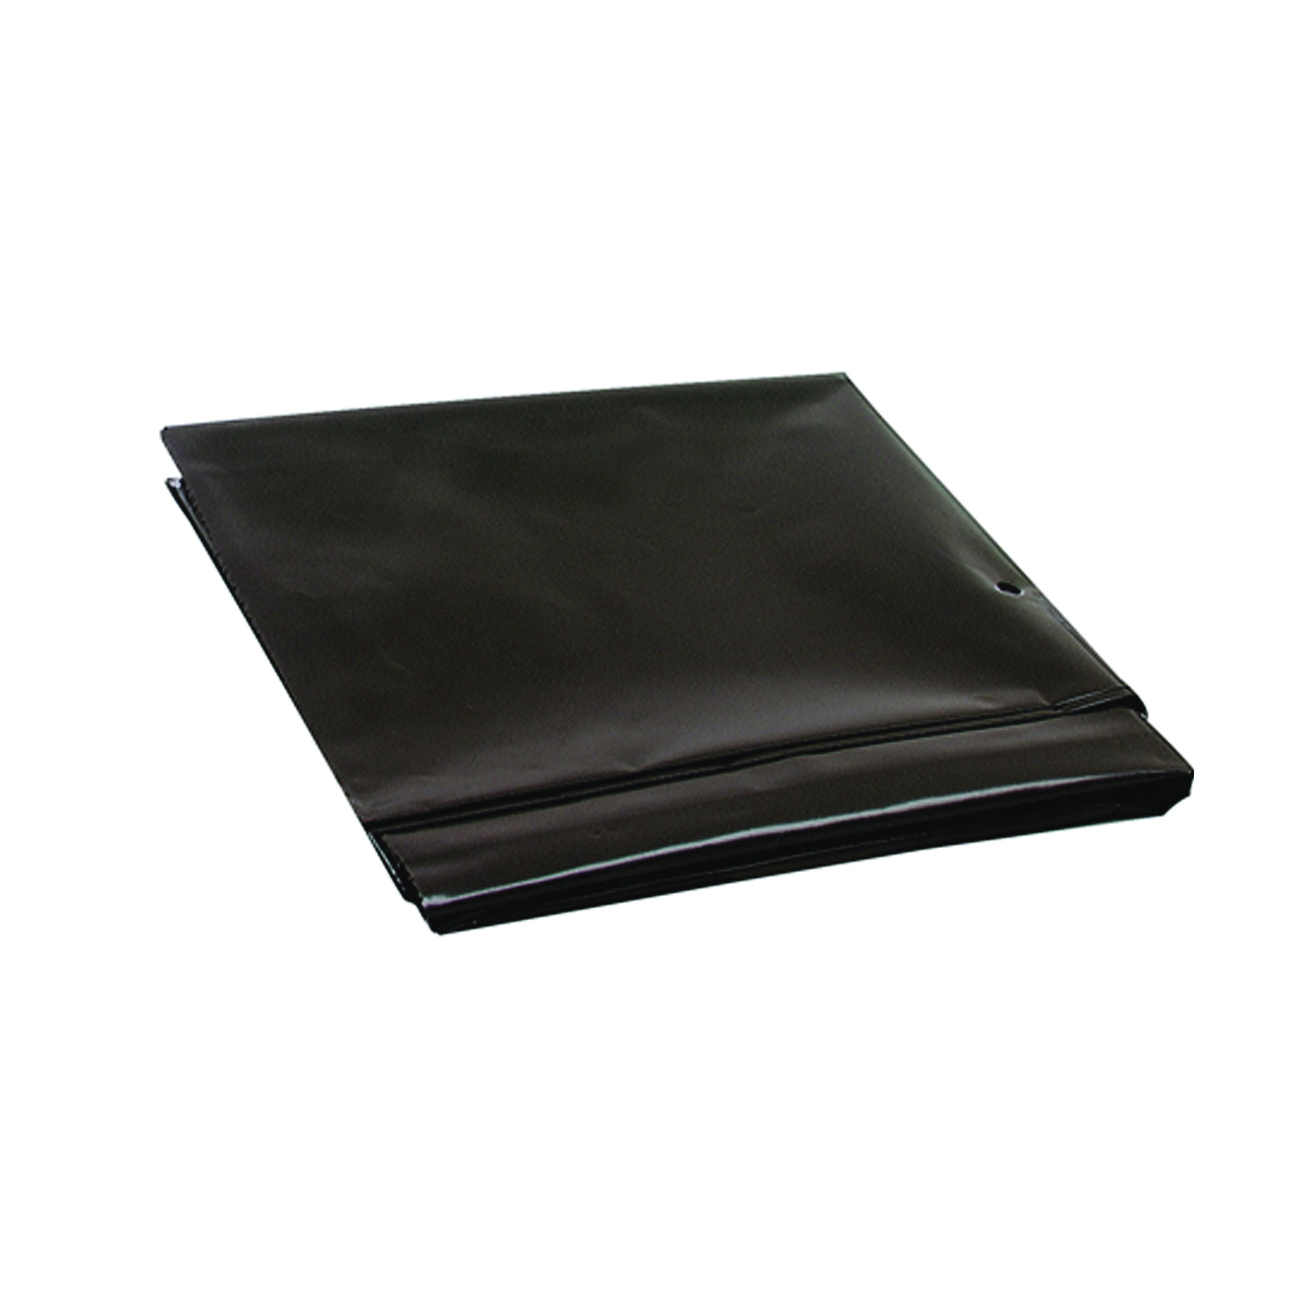 03376 Turbine Vent Cover, 0.005 in Thick Material, Polyethylene, Black